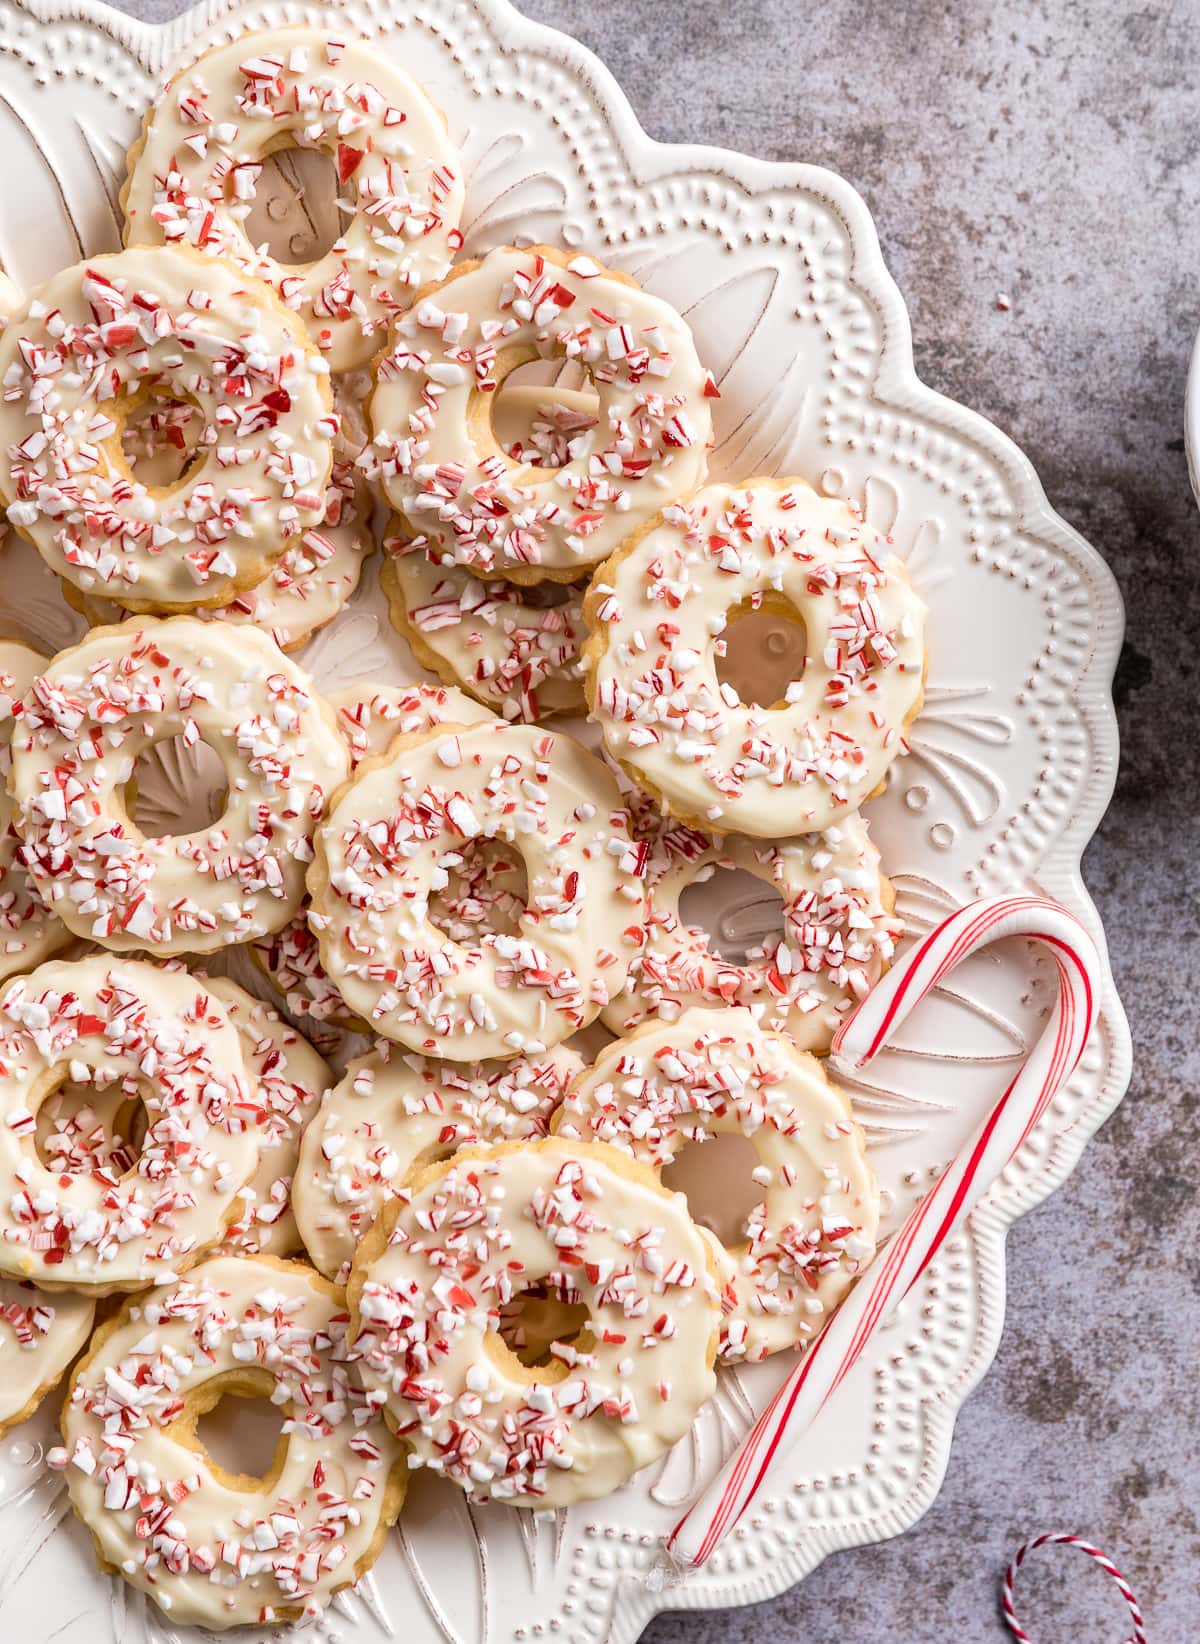 wreath shaped peppermint shortbread cookies on a white plate candy canes bowl of candy cane pieces